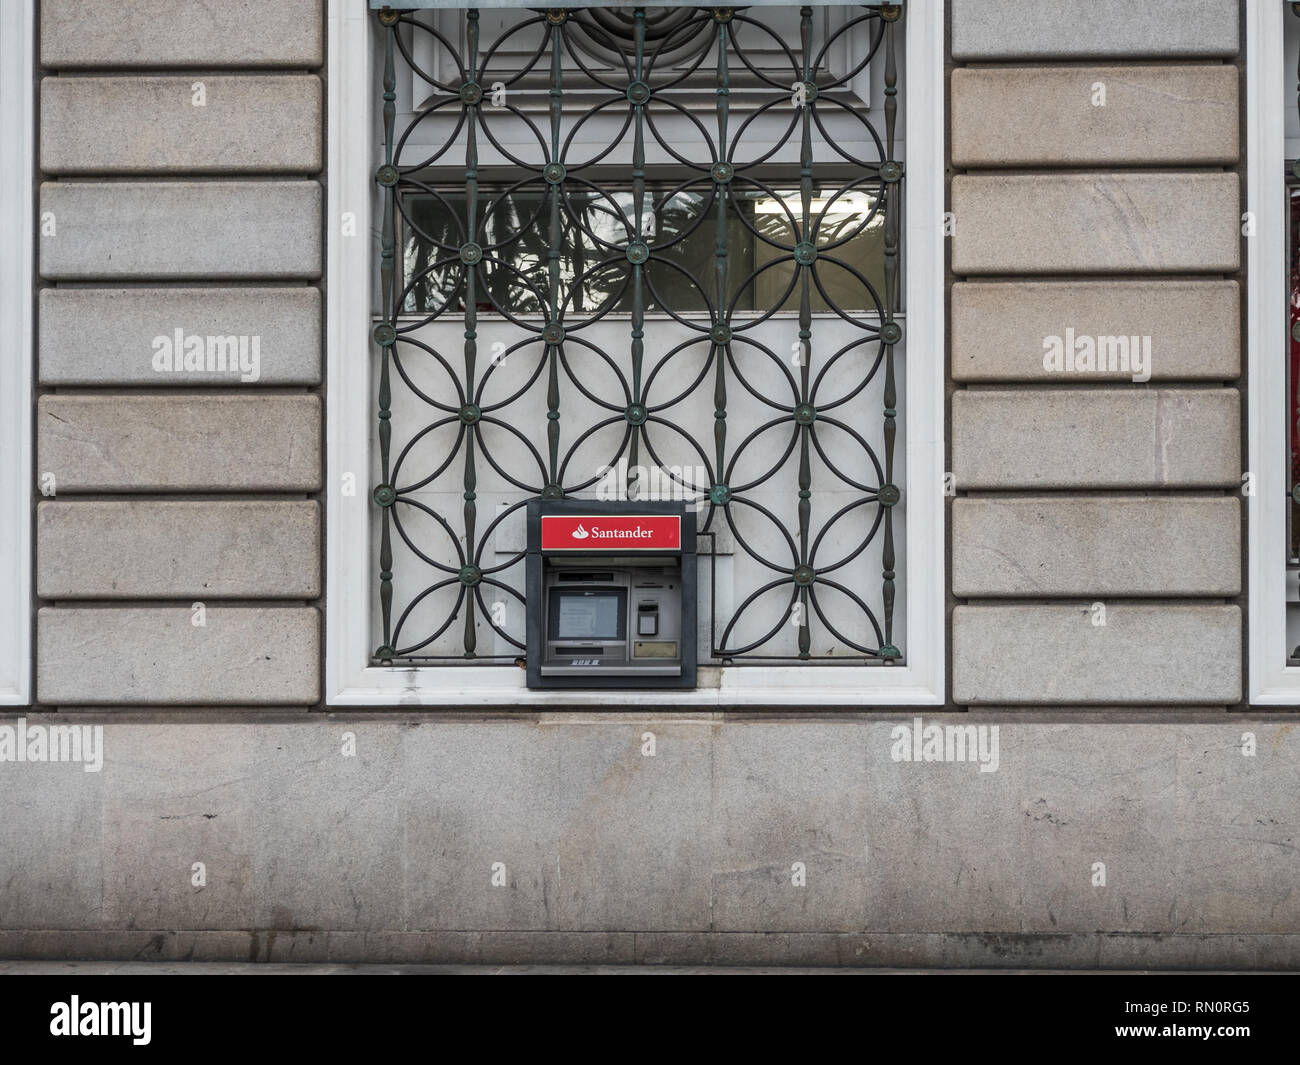 A Coruna, Spain - February 5, 2019 - ATM of Santander bank in the street Stock Photo